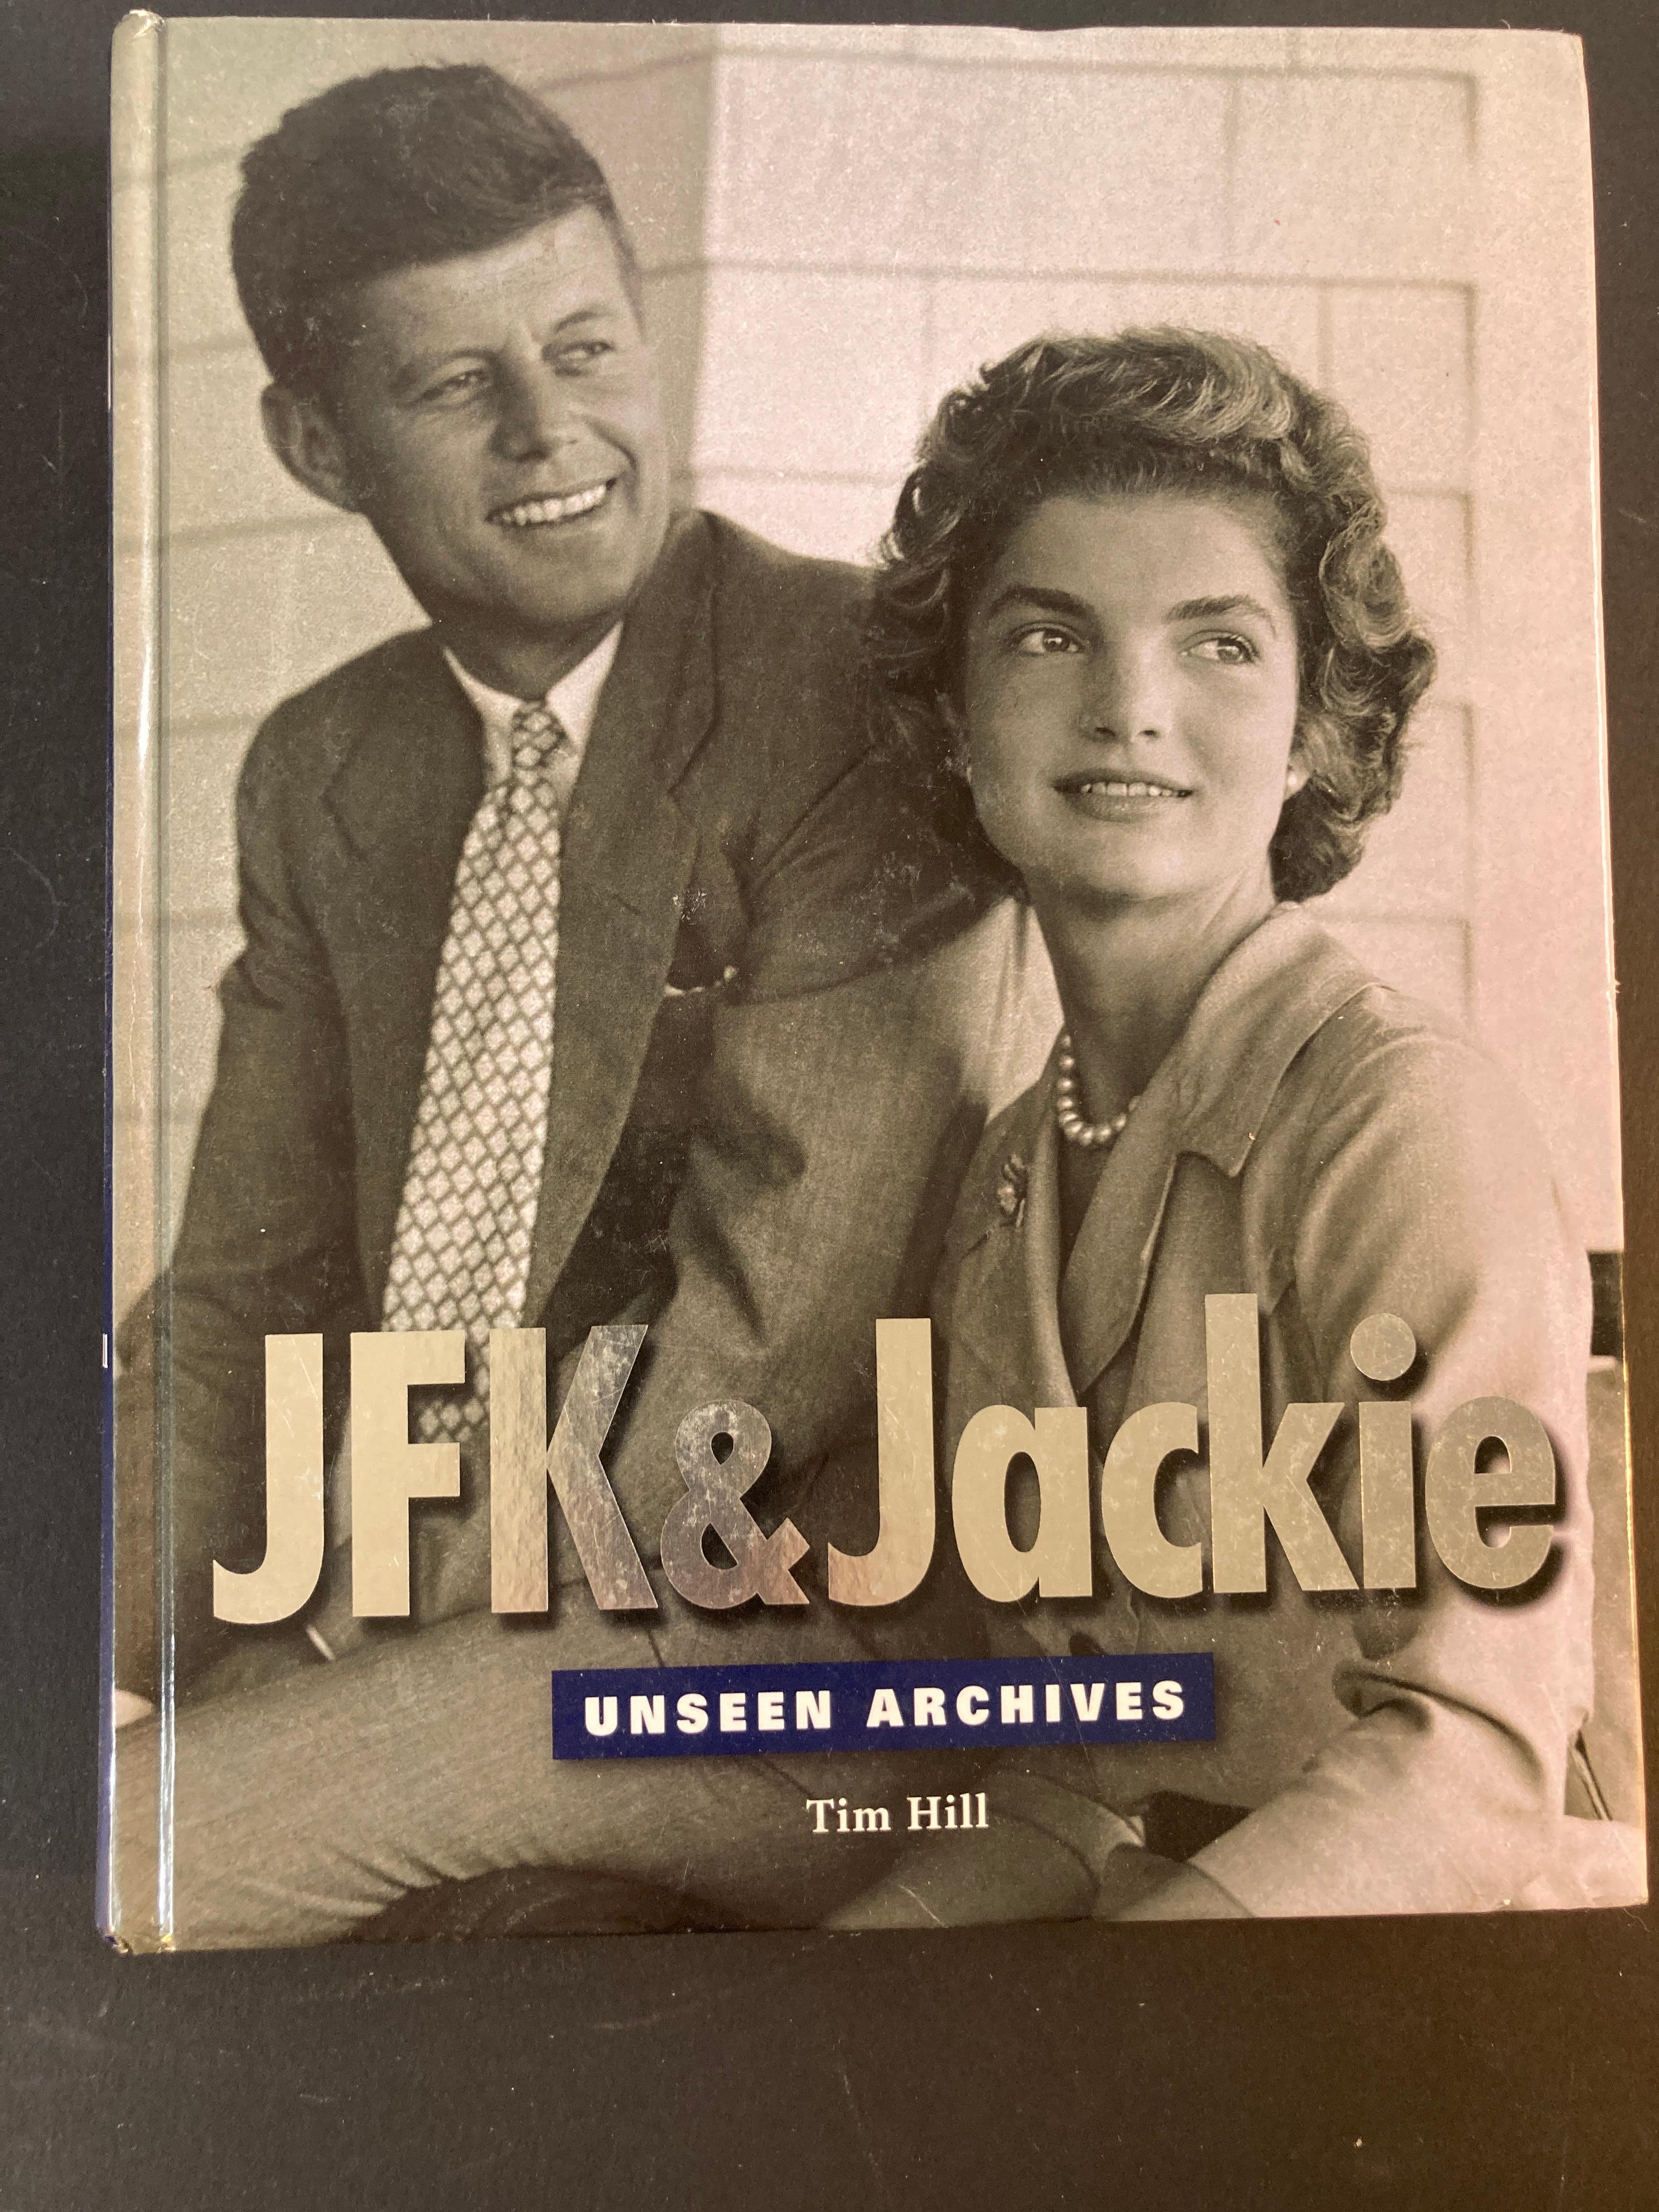 JFK & Jackie. Unseen Archives by Tim Hill.
London: Parragon, Incorporated, 2003. First Edition; First Printing. Hardcover.
JFK and Jackie: unseen archives charts the rise to power of a political giant. 
It also recounts the key moments in a